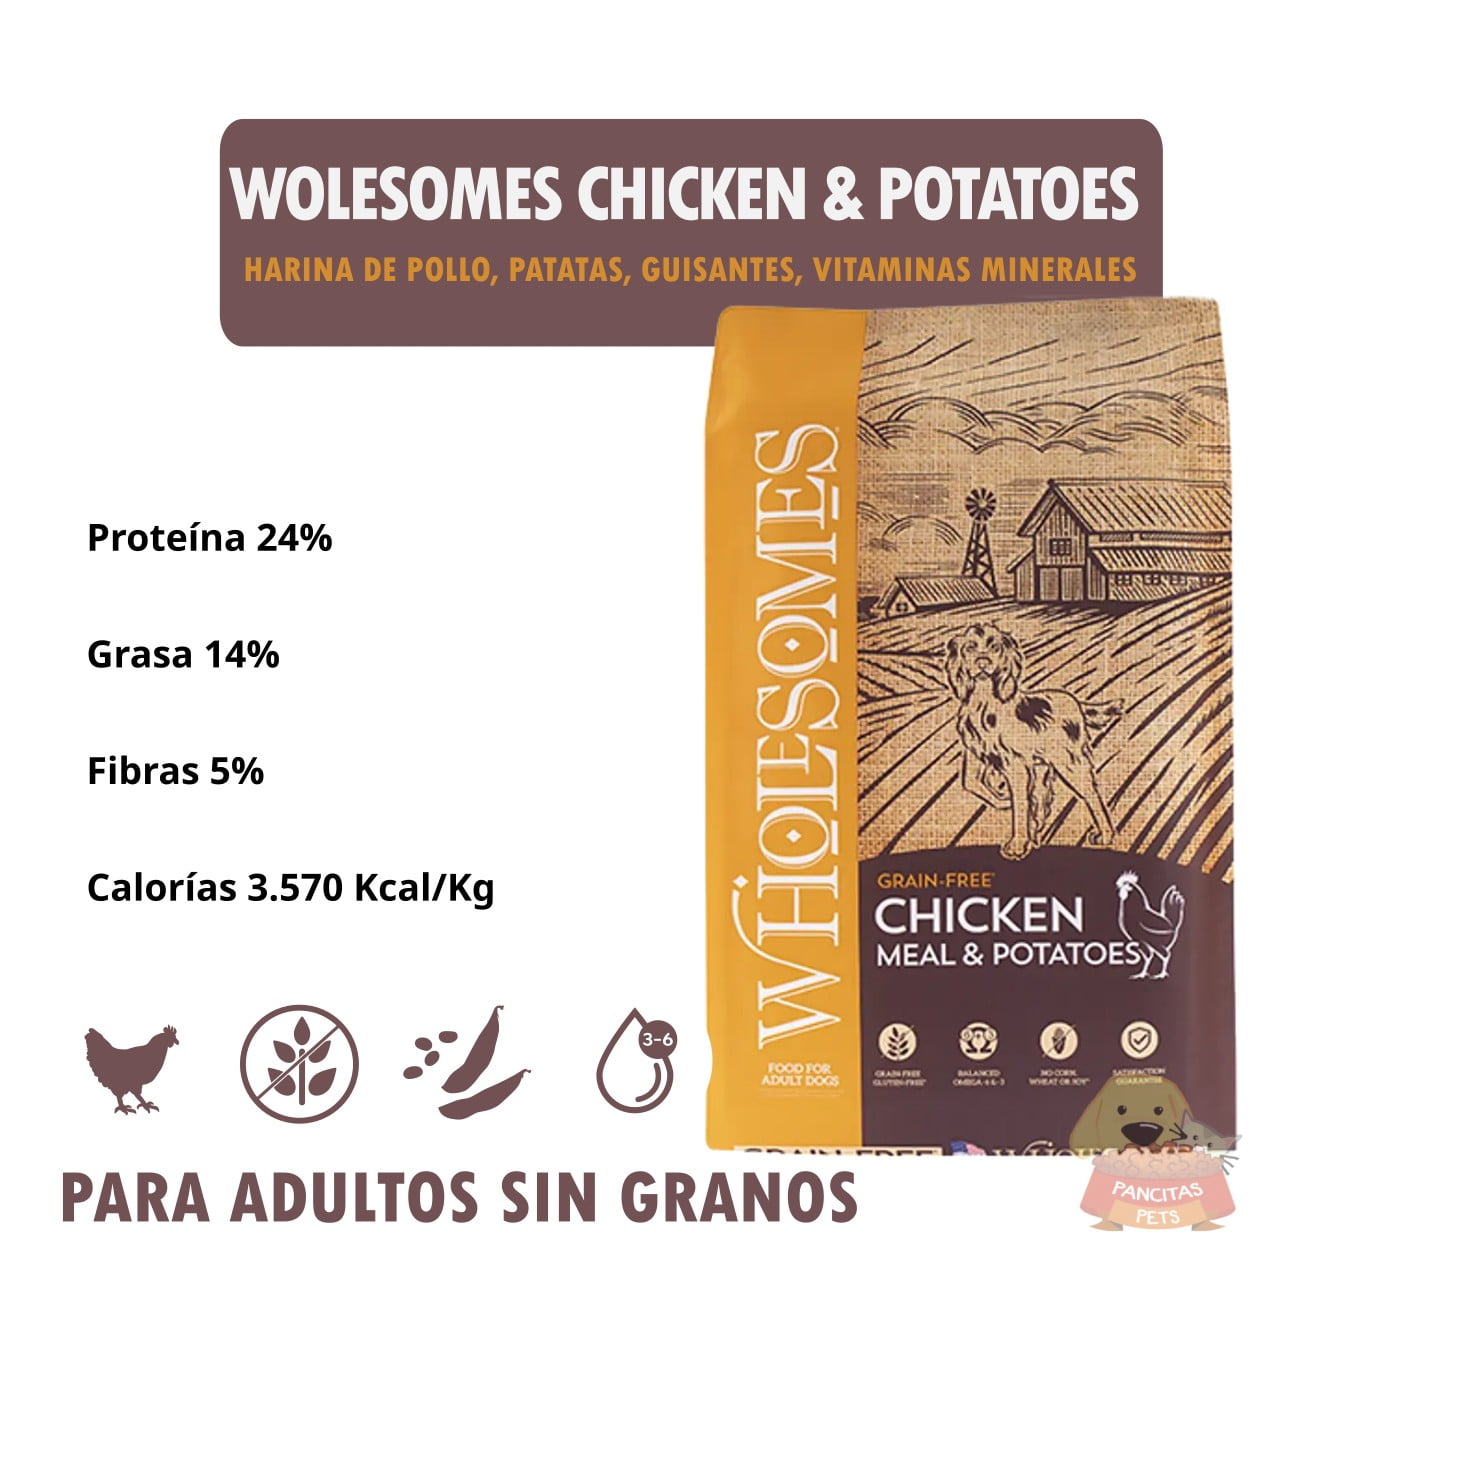 SPORTMIX WHOLESOMES CHICKEN MEAL & POTATOES Detalle